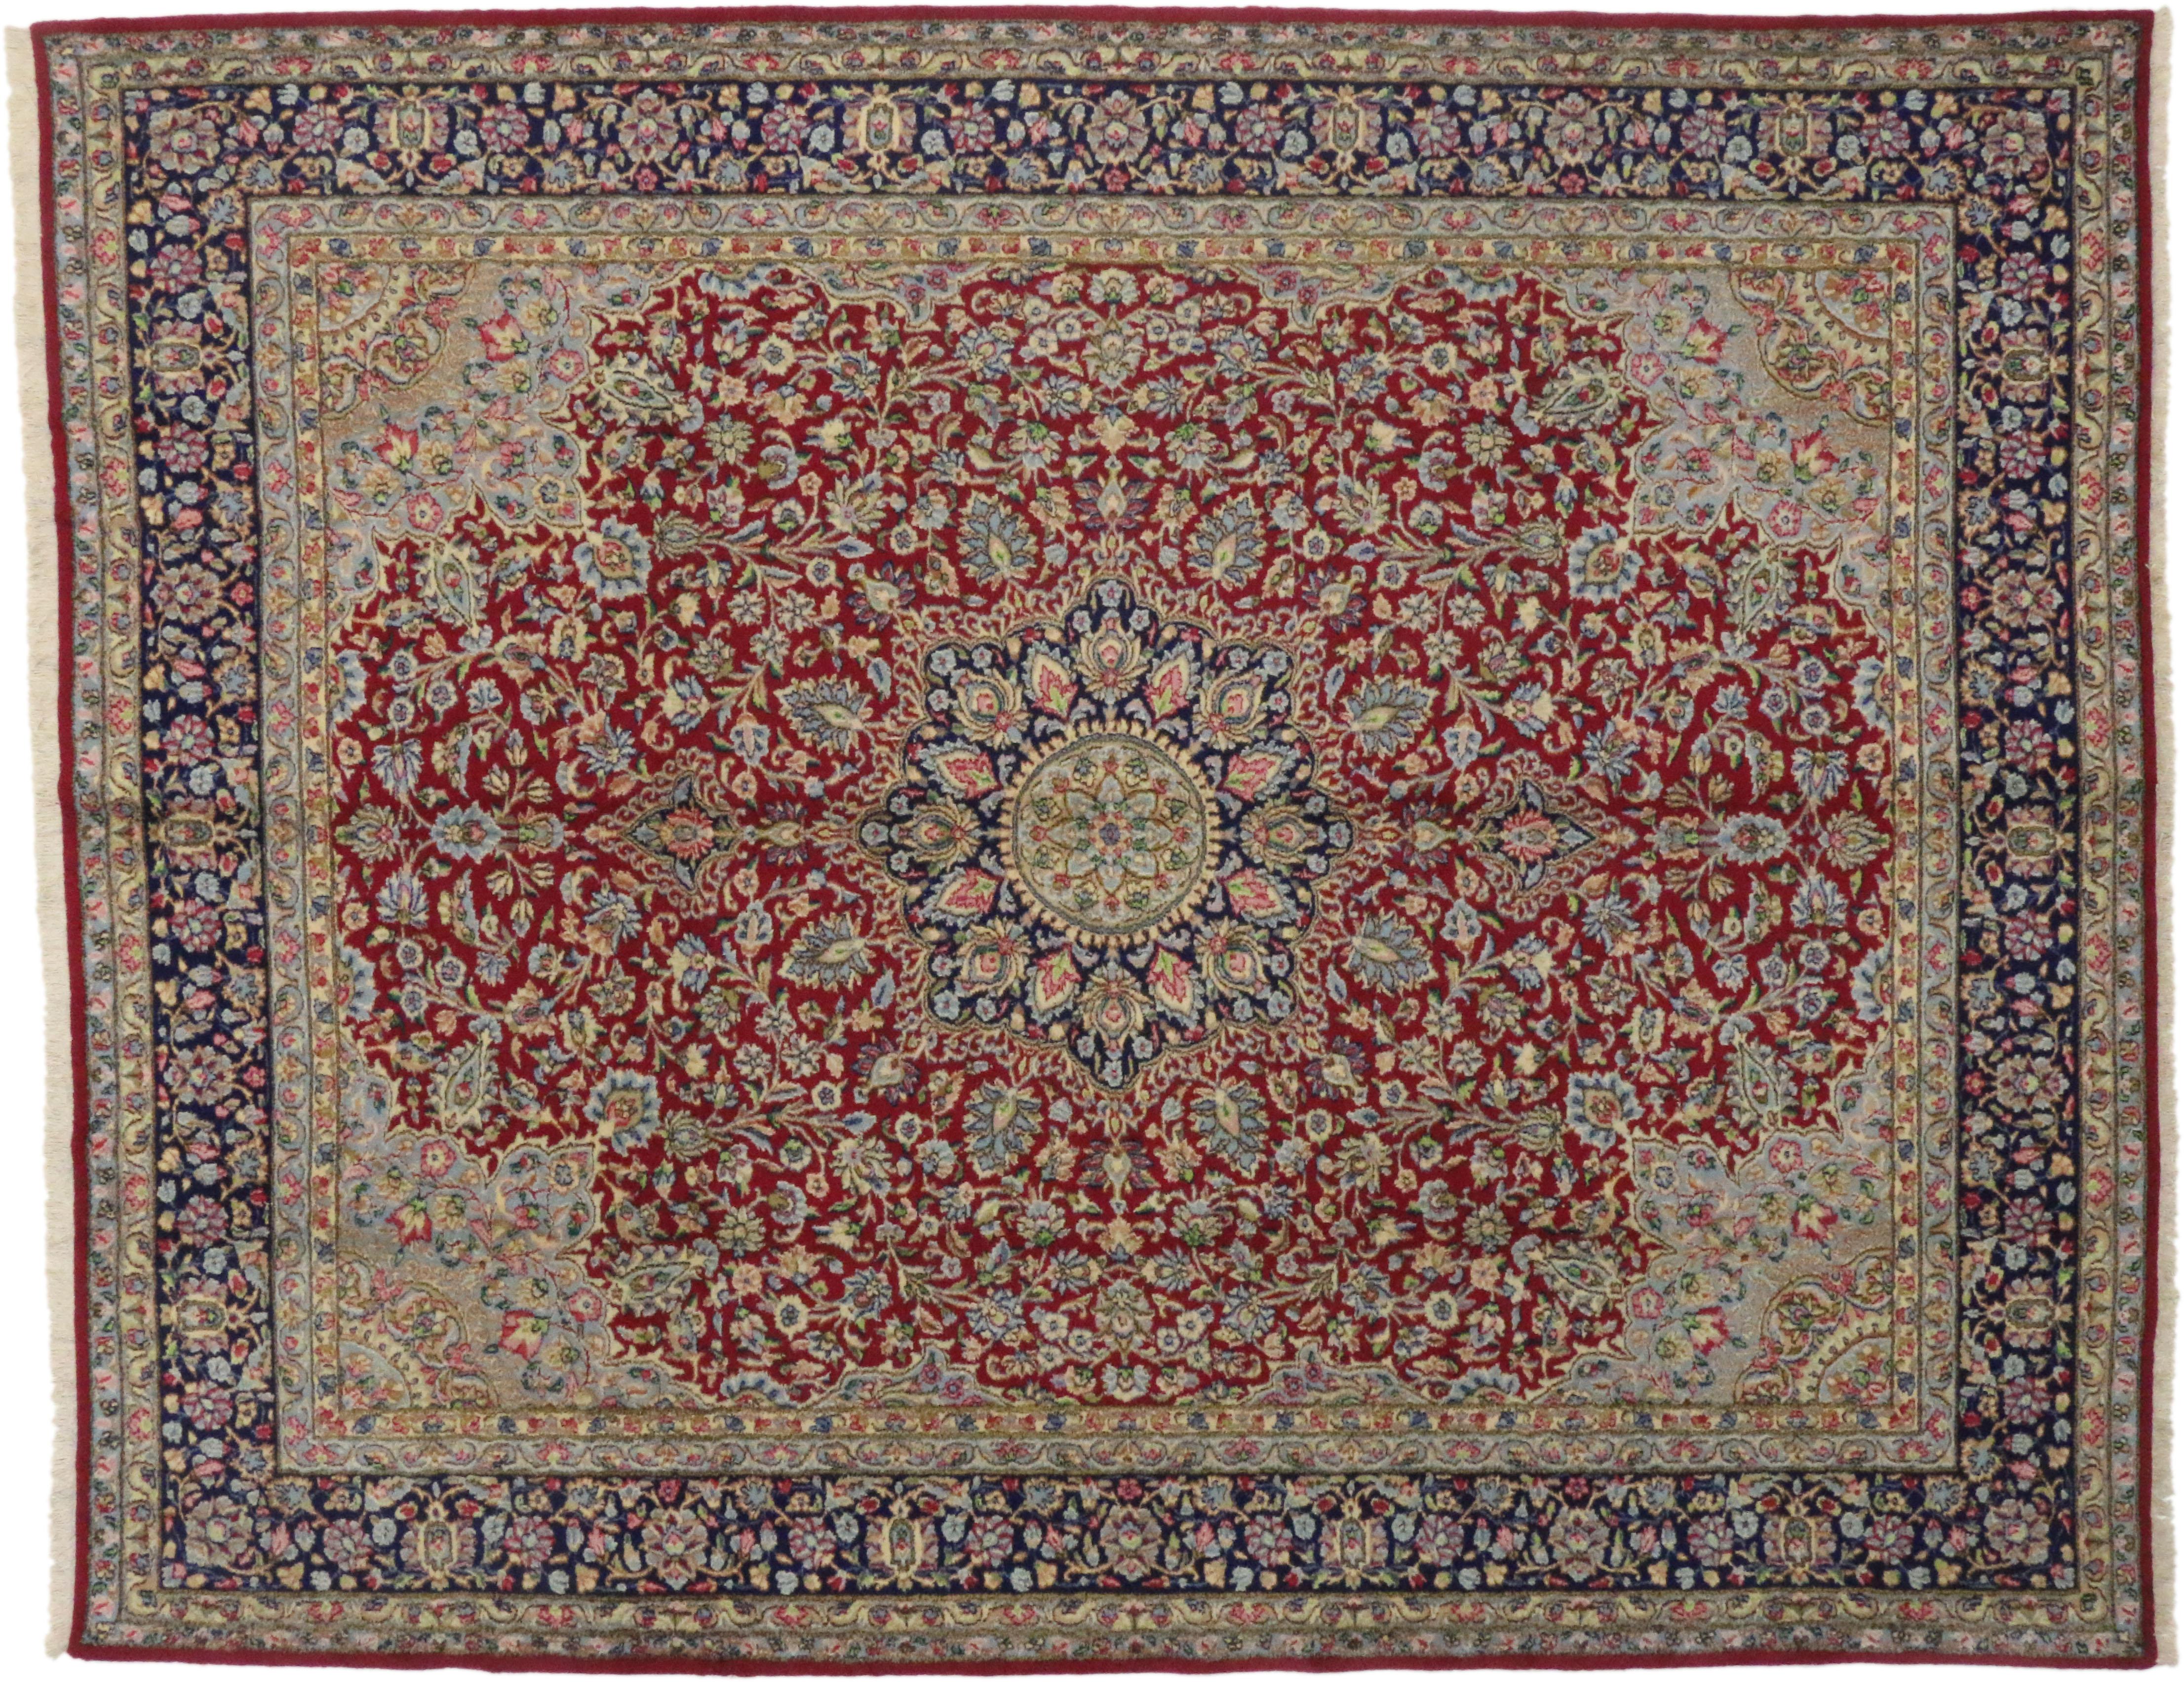 Wool Vintage Persian Kerman Rug with Old World French Victorian Style, Kirman Rug